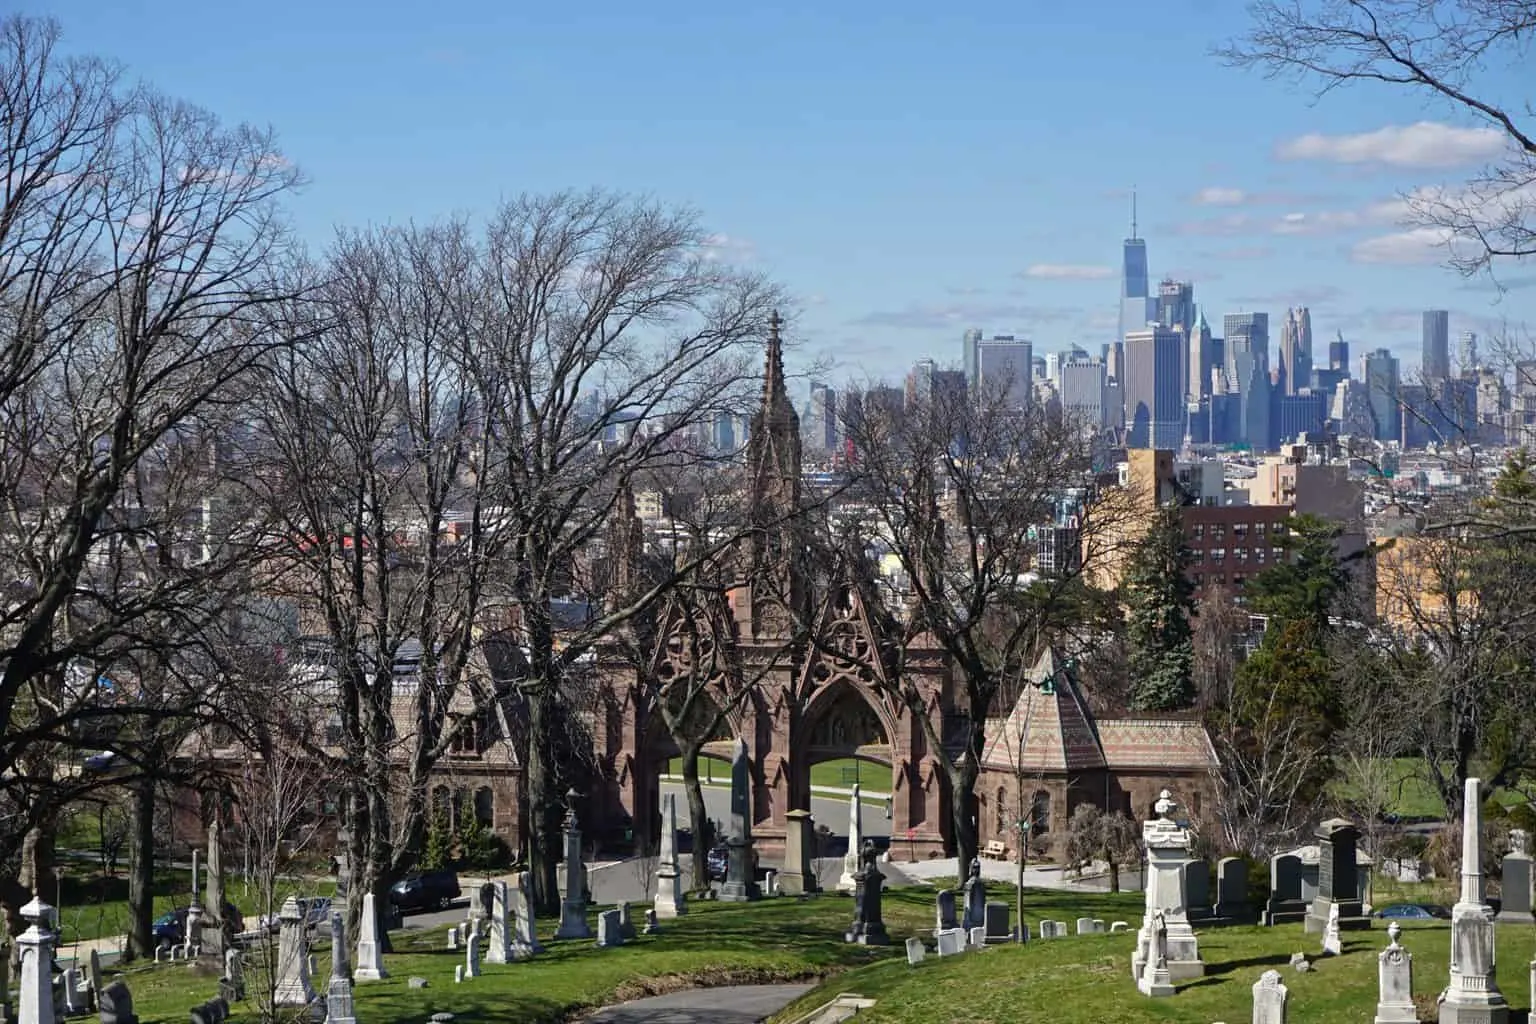 Discover some of the stunning views of the Manhattan skyline from Green-Wood Cemetery's Battle Hill.